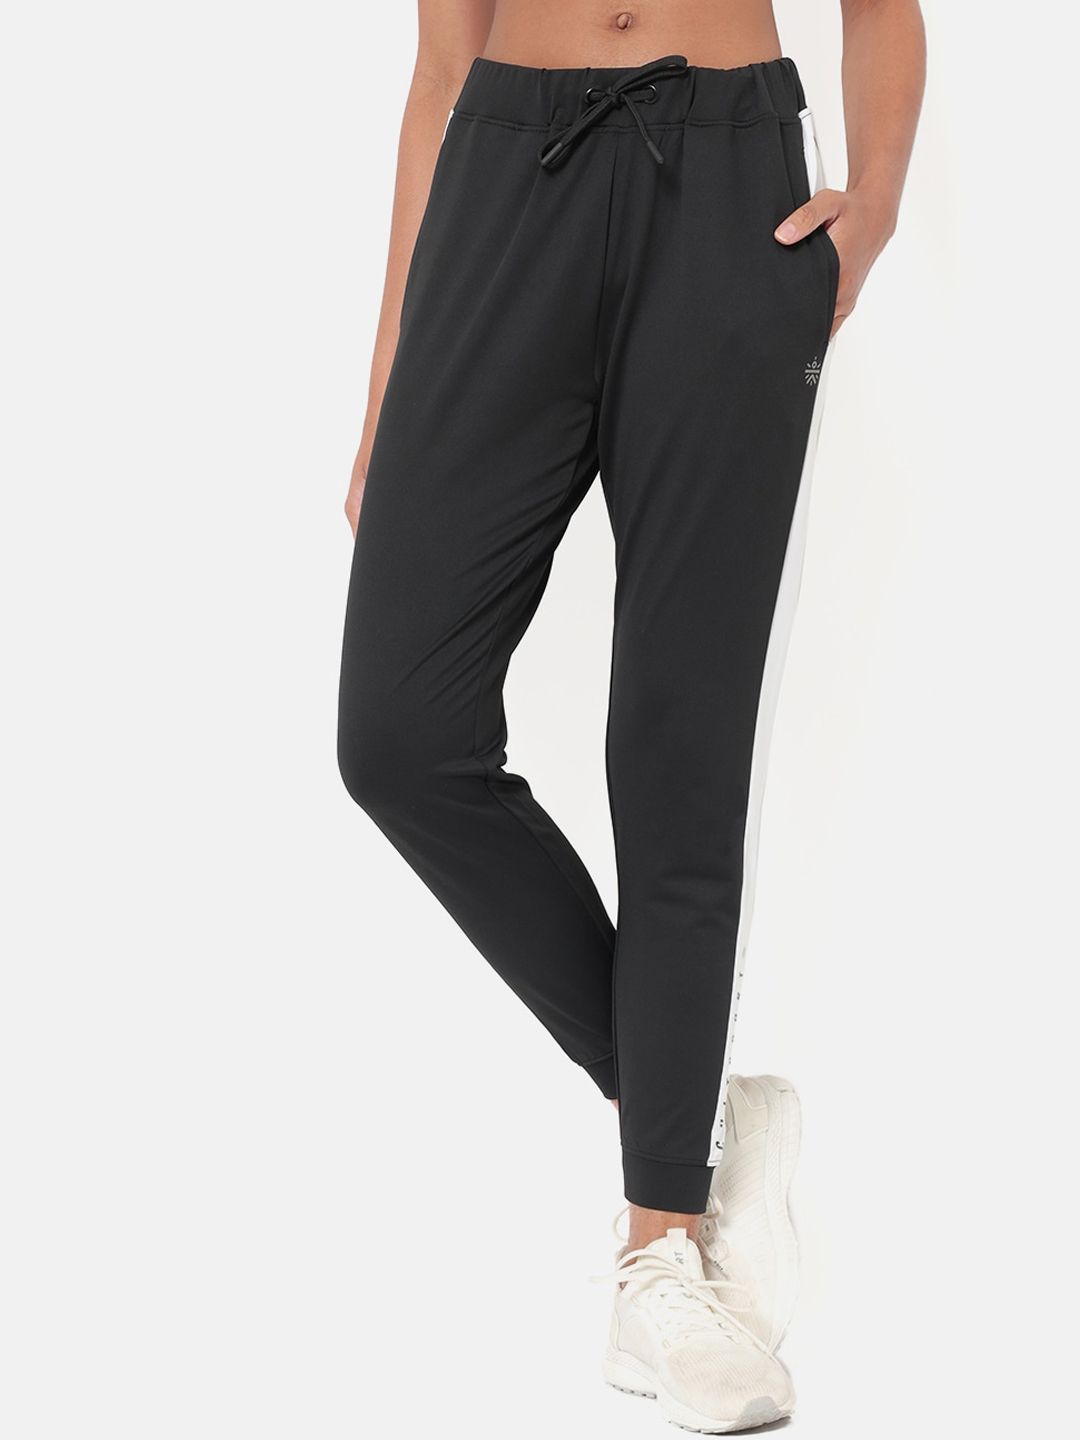 Cultsport Women Black Solid Antimicrobial Joggers Price in India